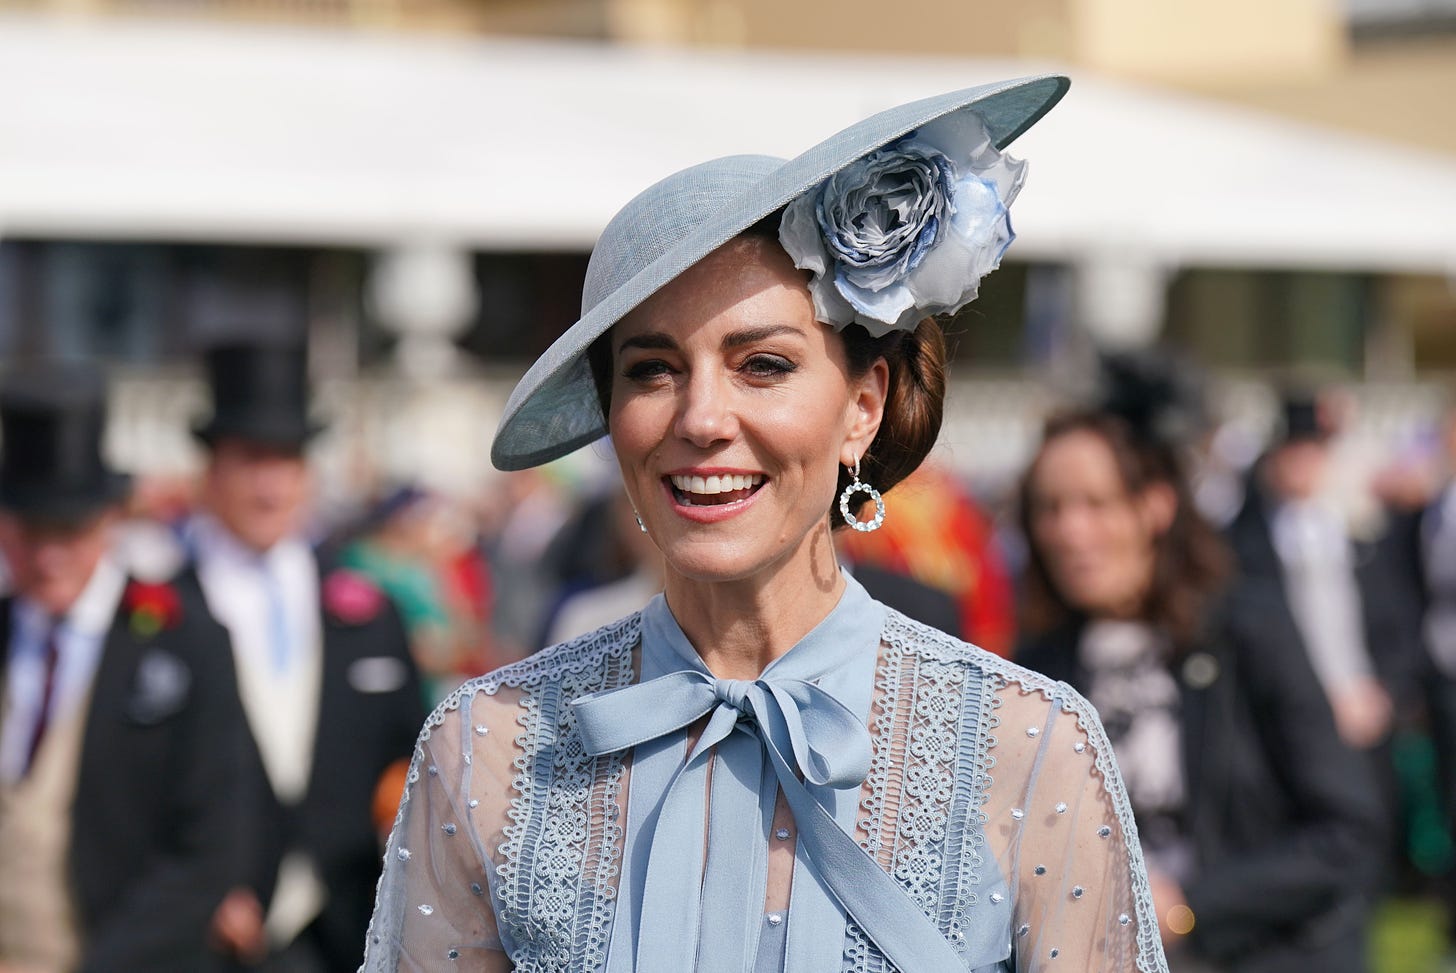 Kate Middleton wearing blue dress and hat at garden party